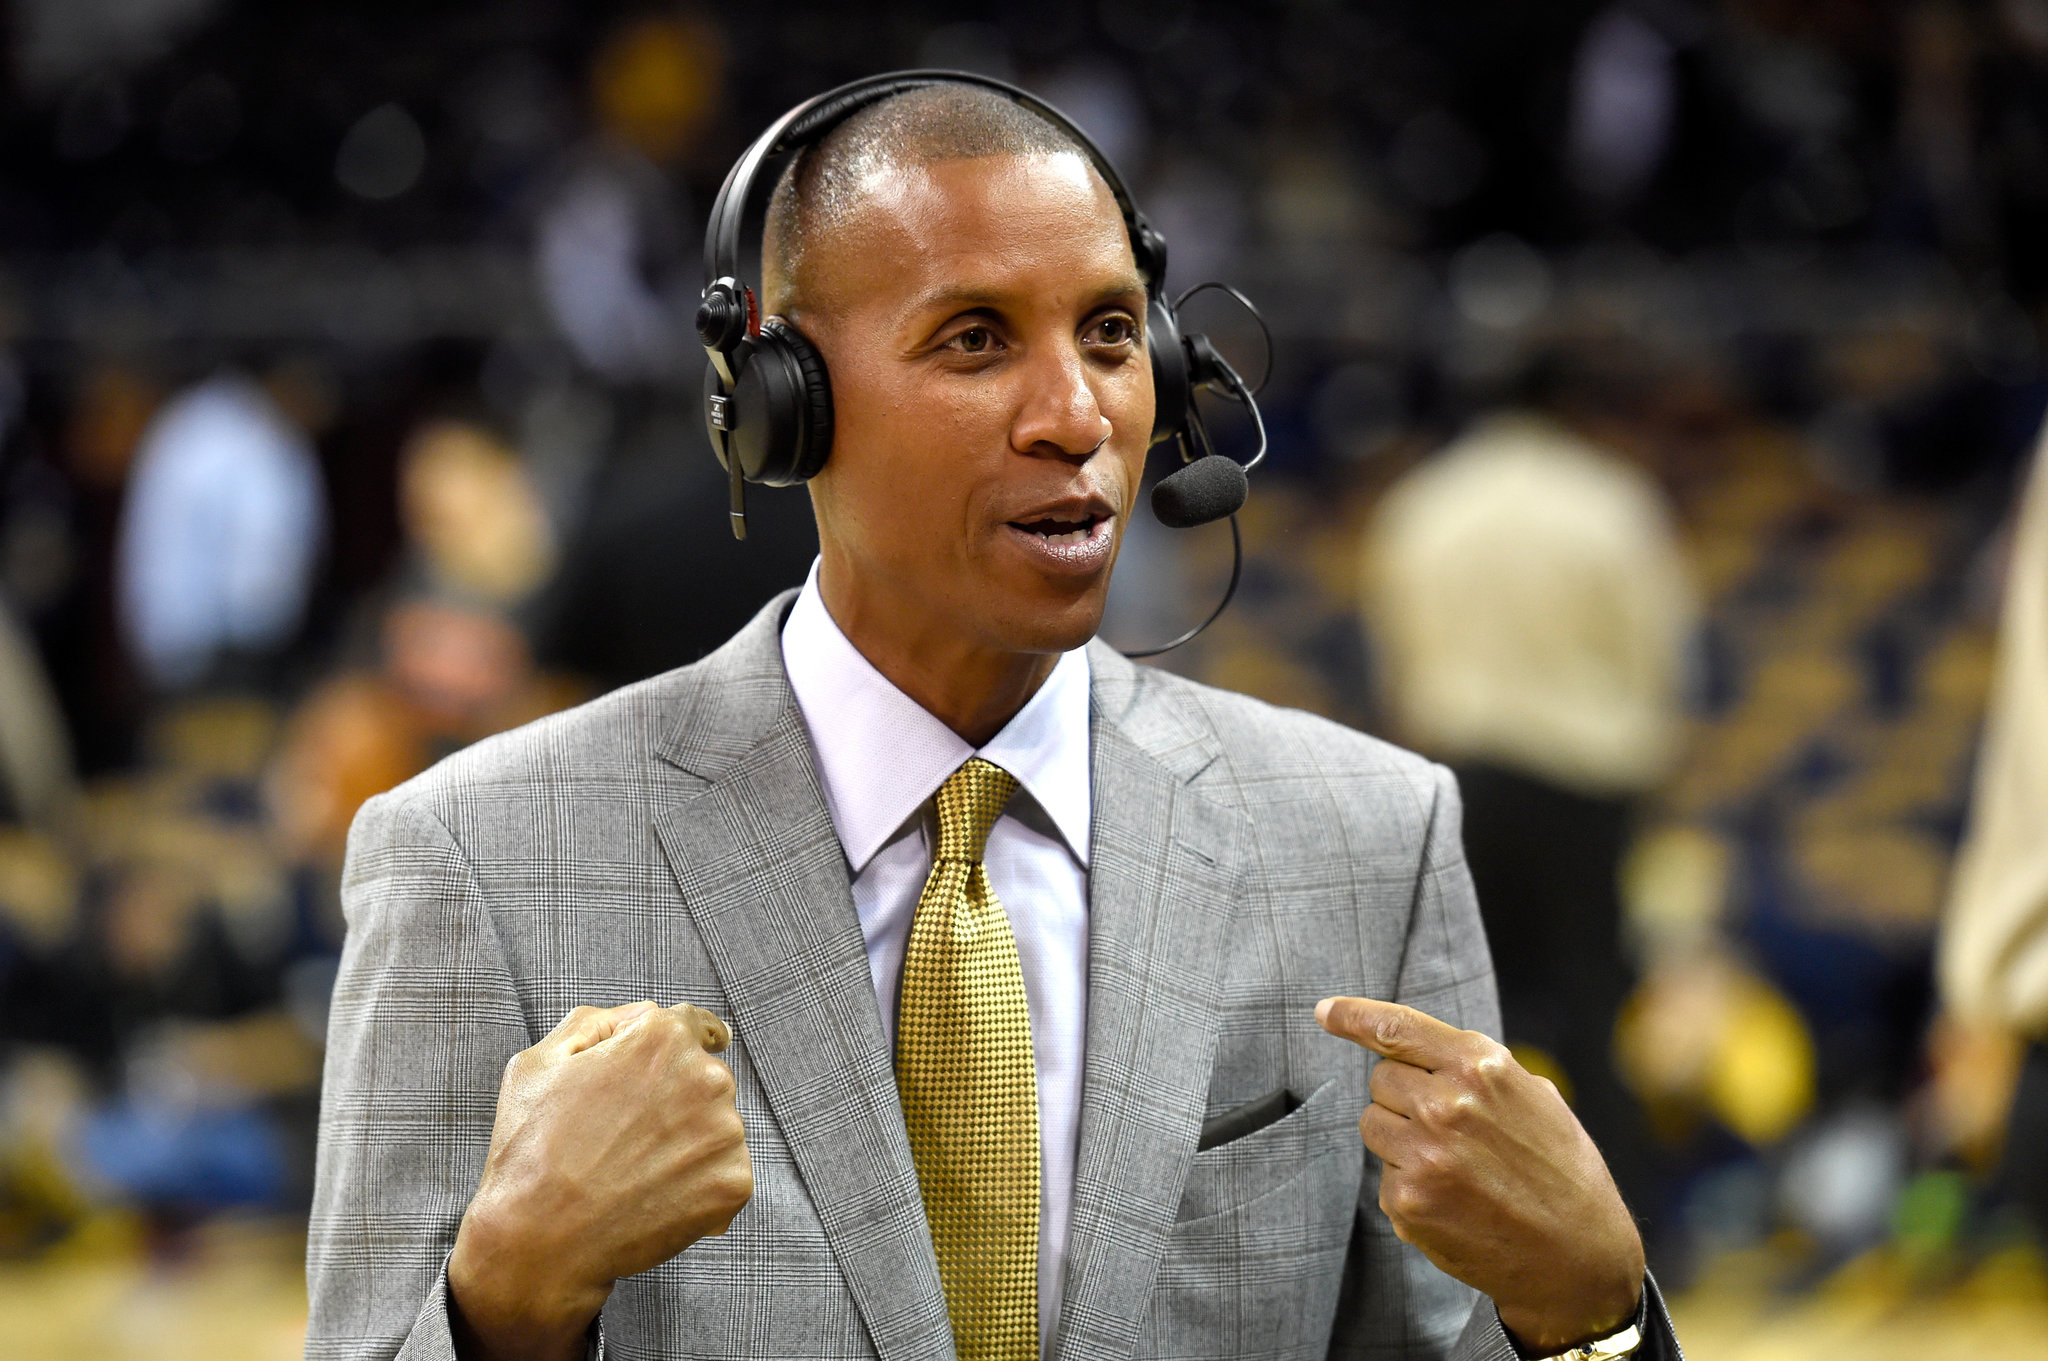 After the Indiana Pacers Won the Playoff Series, Reggie Miller Taunted the New York Knicks